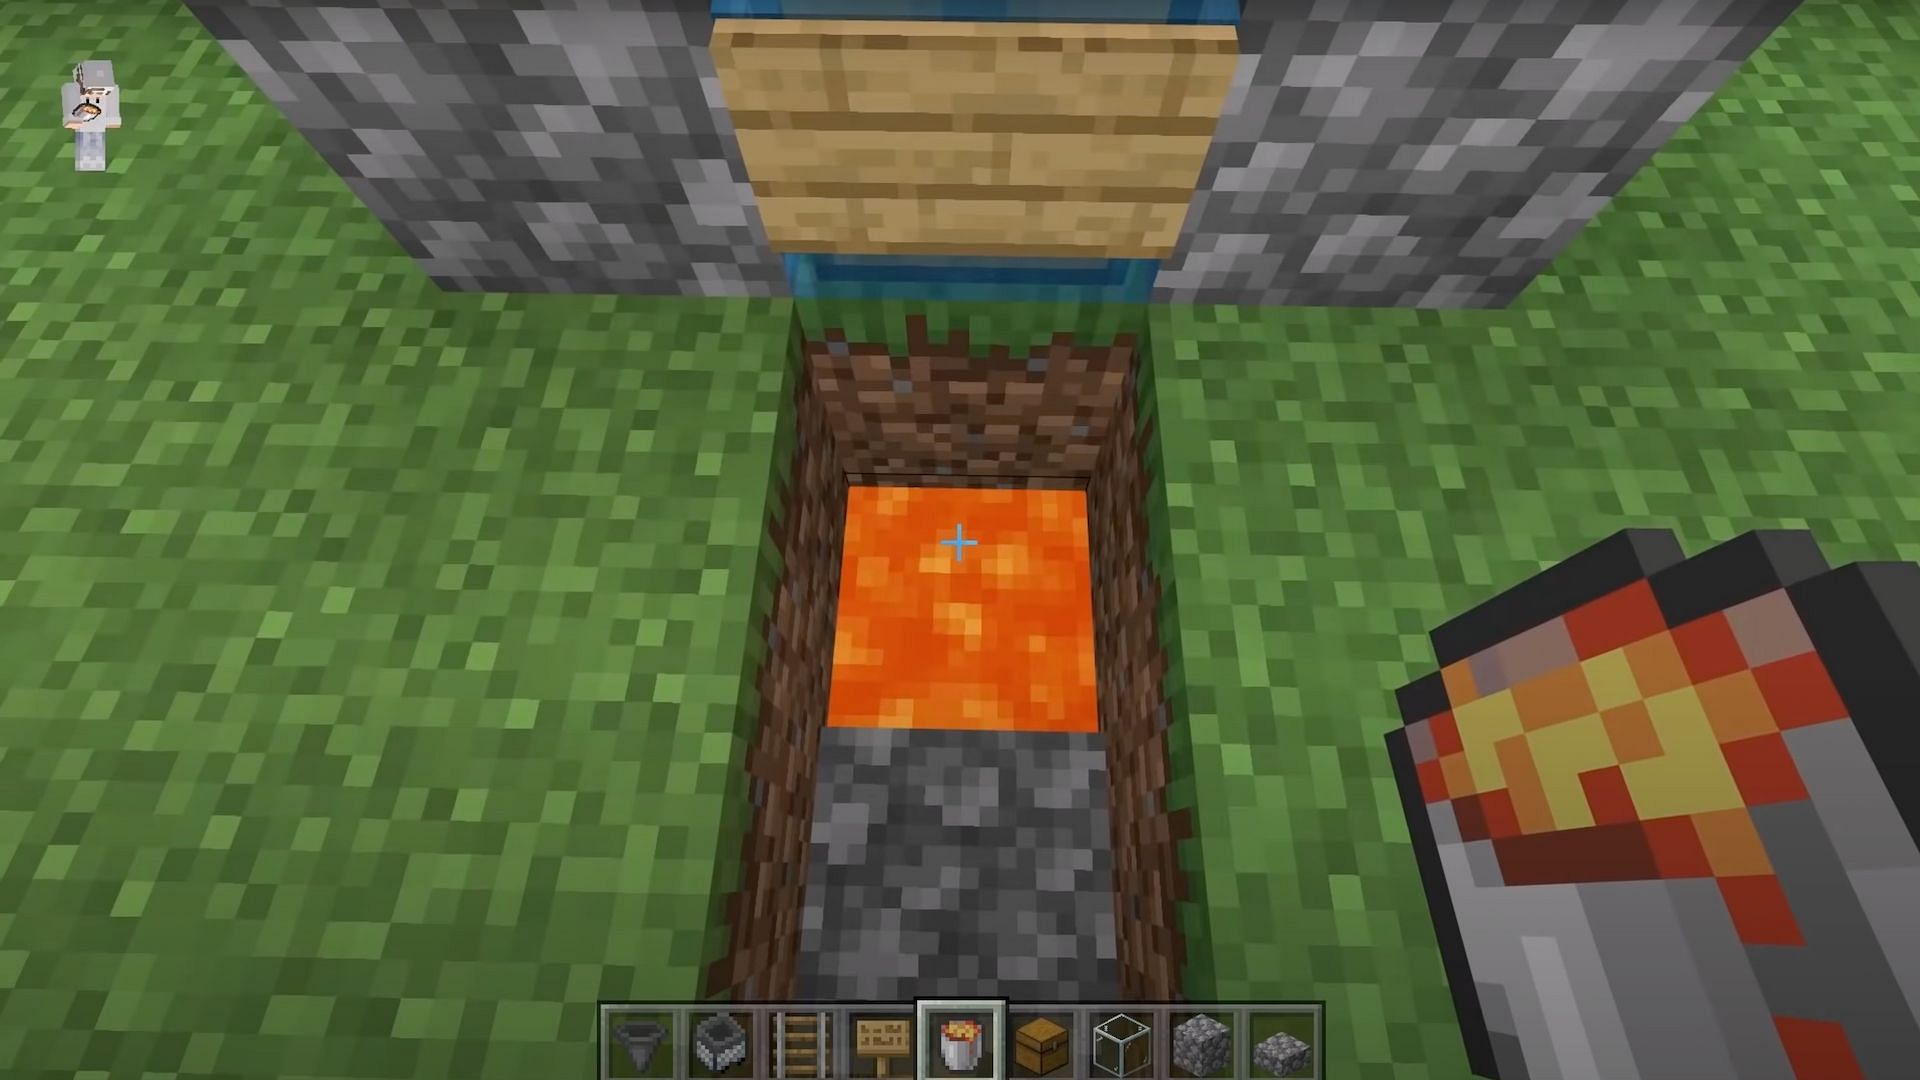 Players should pour the lava on top of the minecart with hopper (Image via JC Playz/YouTube)